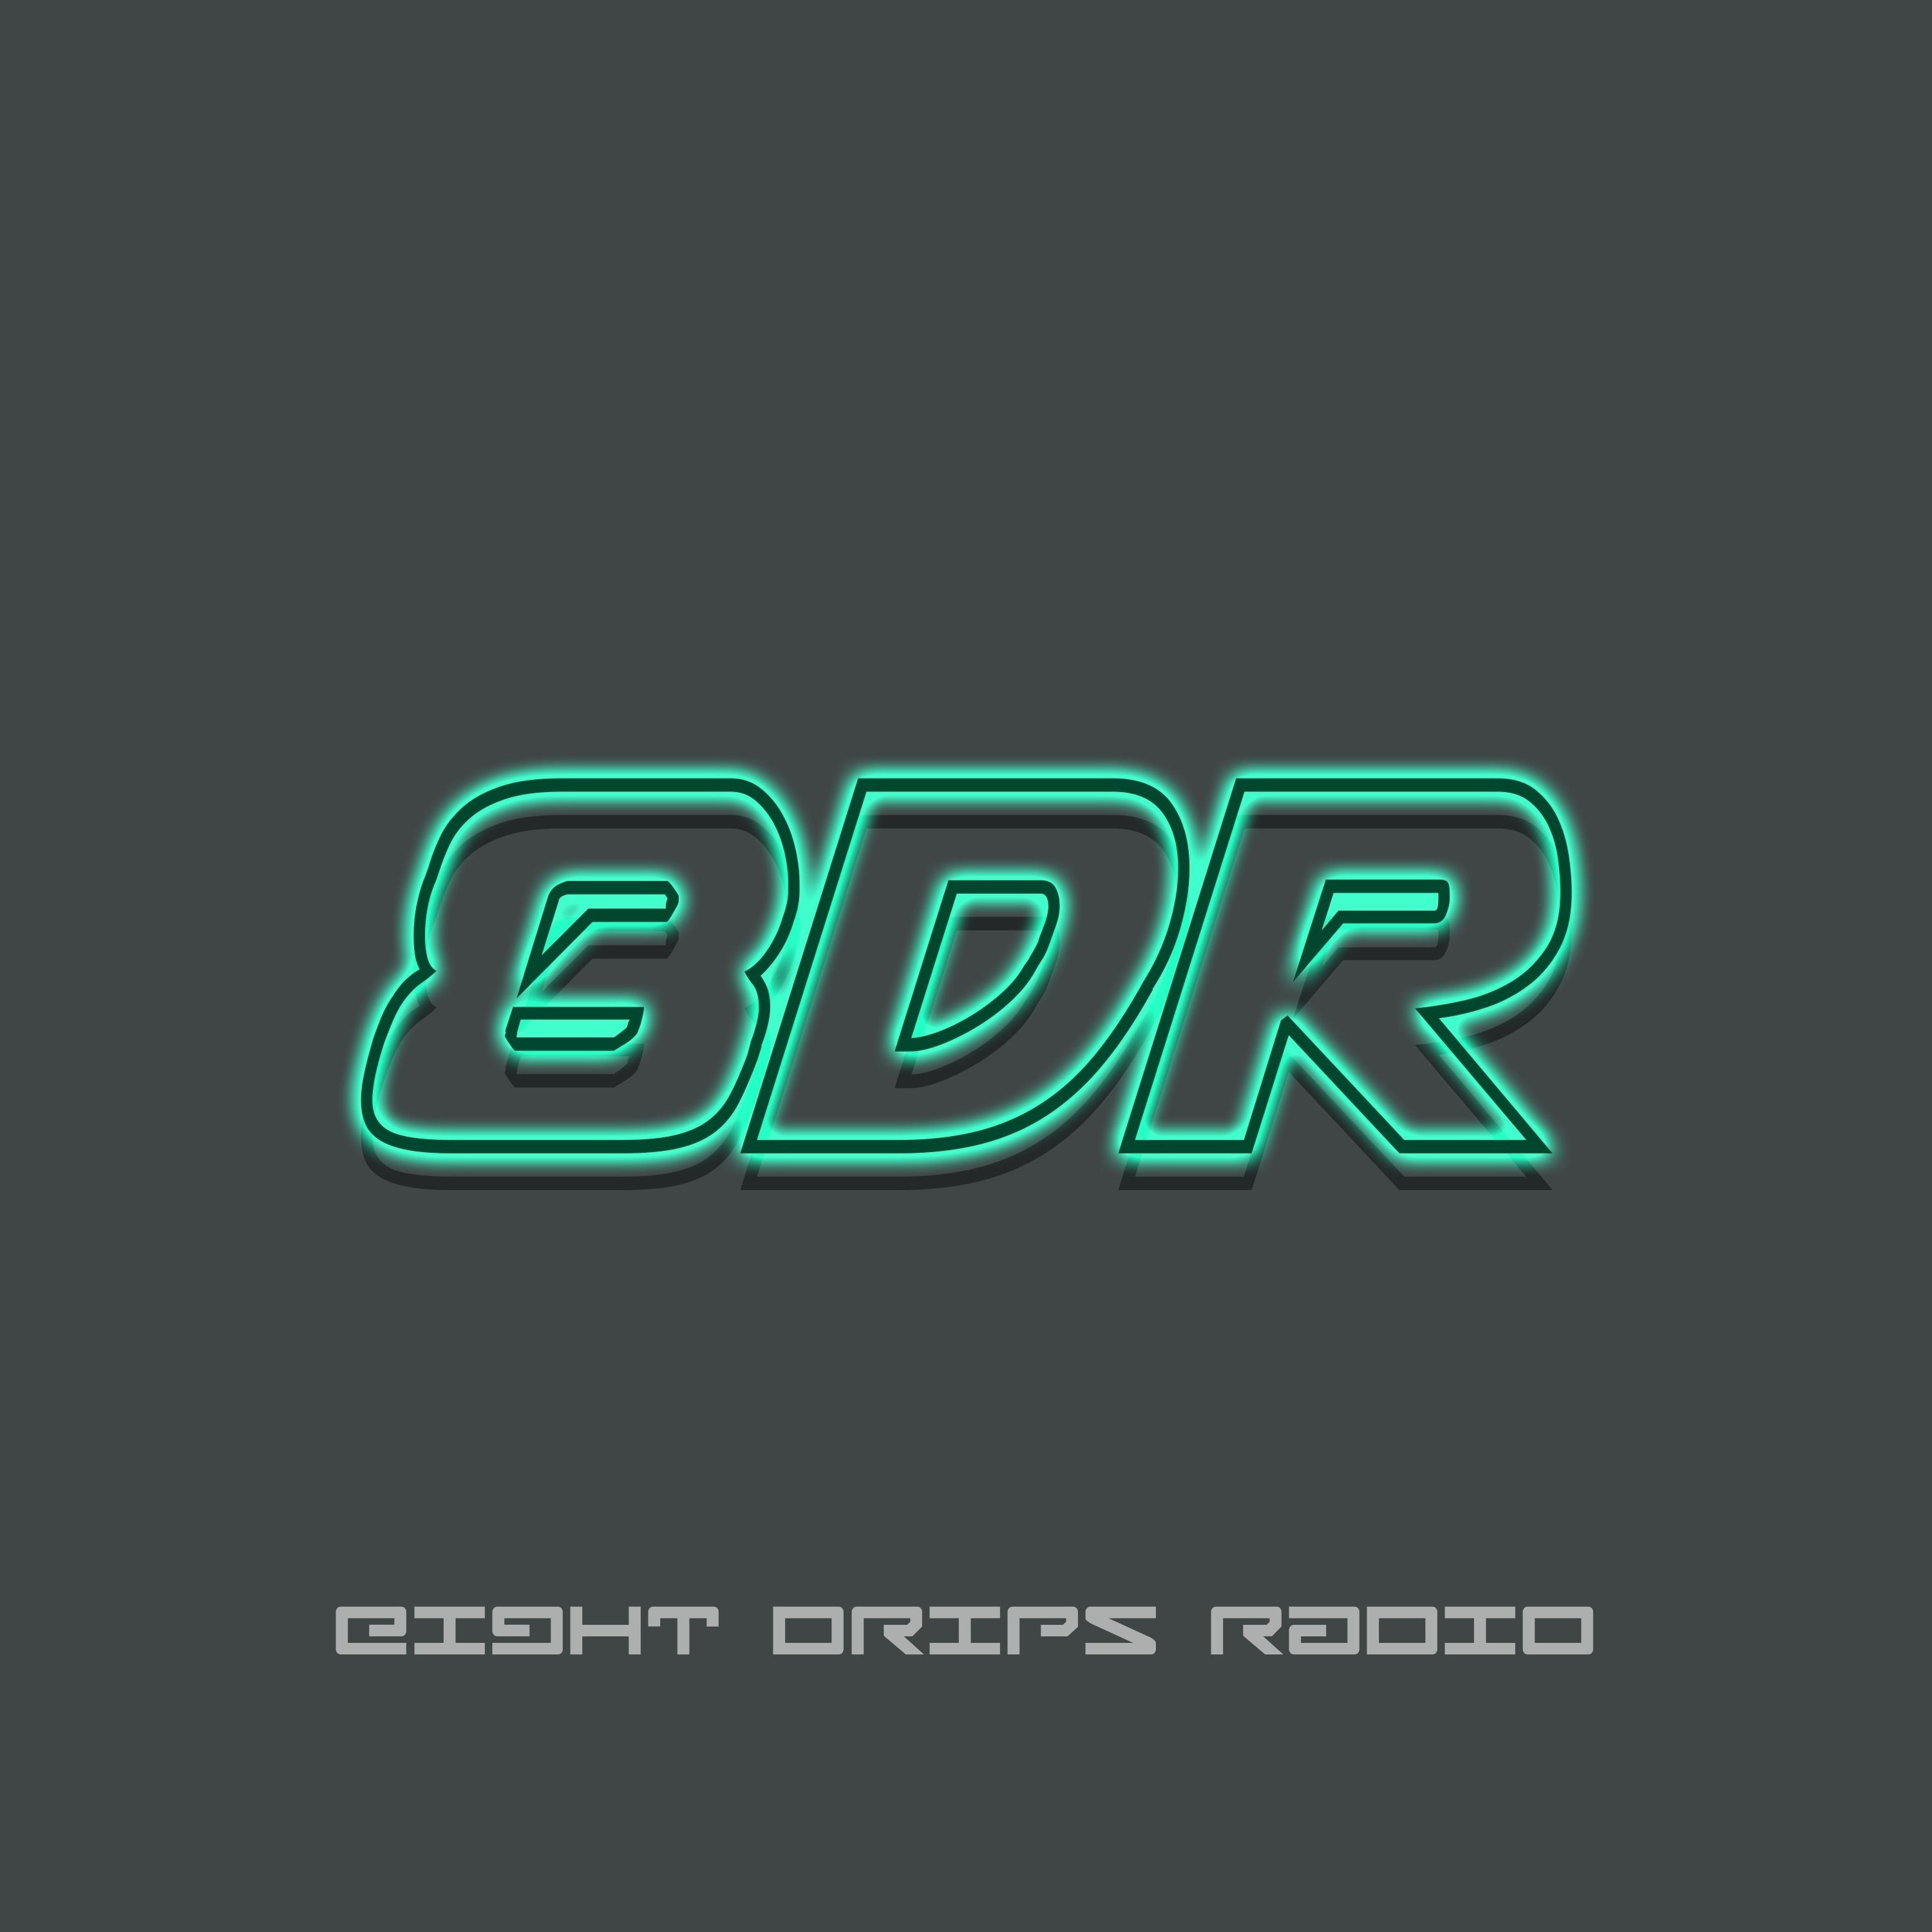 EIGHT DRIPS RADIO Episode 017 - Dubstep Special with LEBLAENG